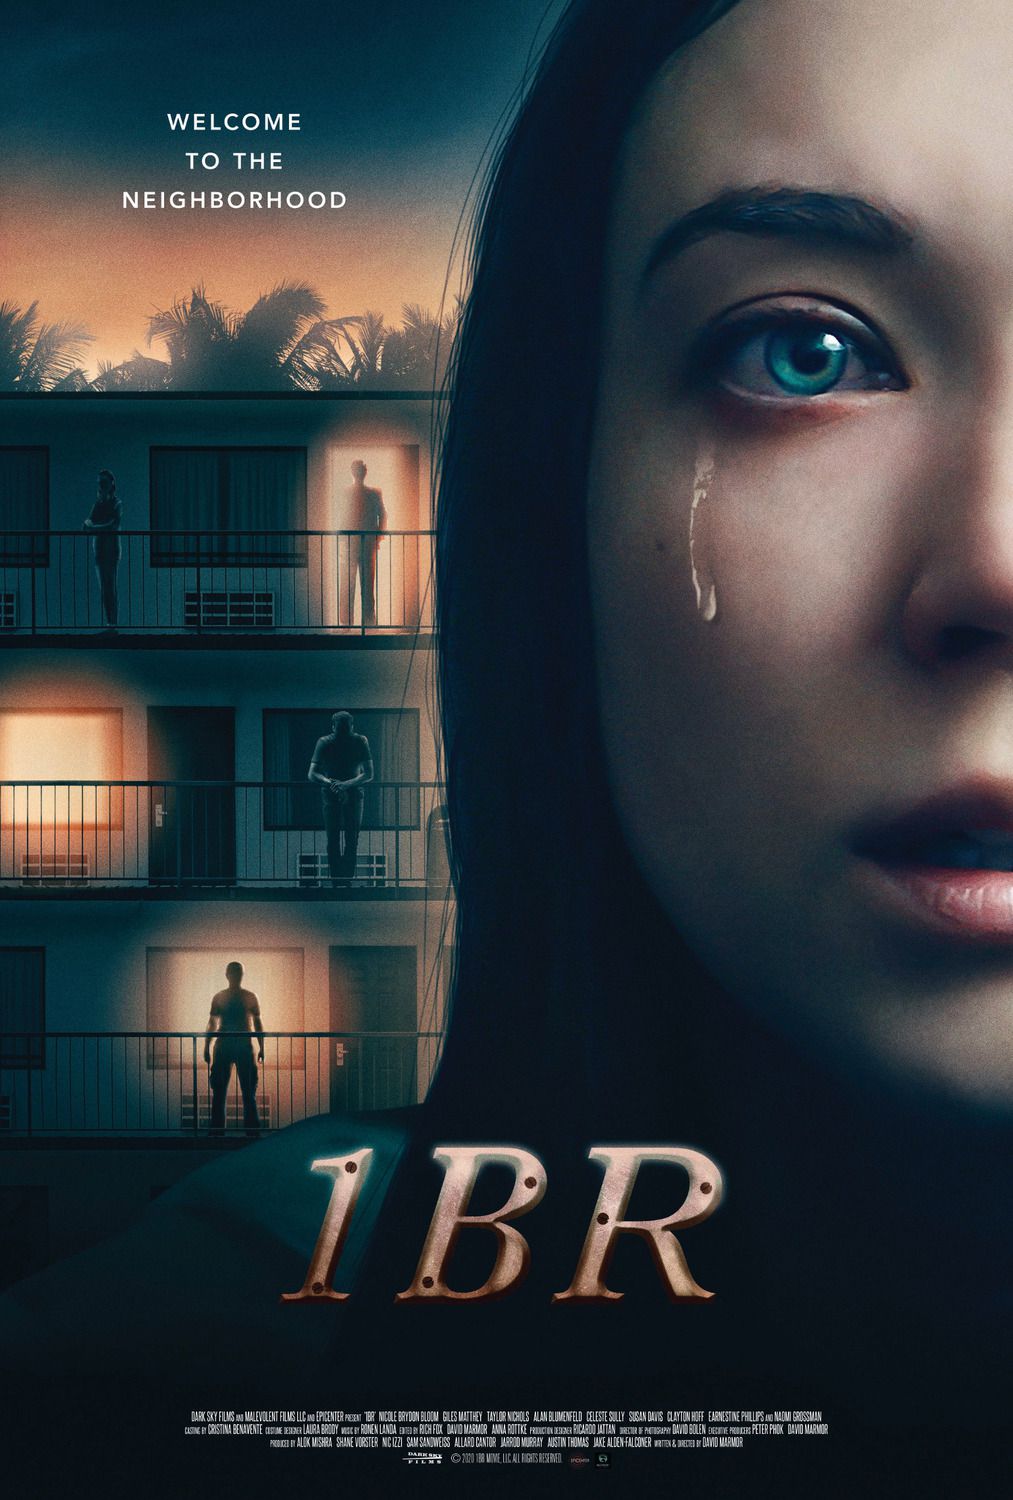 1BR : The Apartement - Film (2021) streaming VF gratuit complet